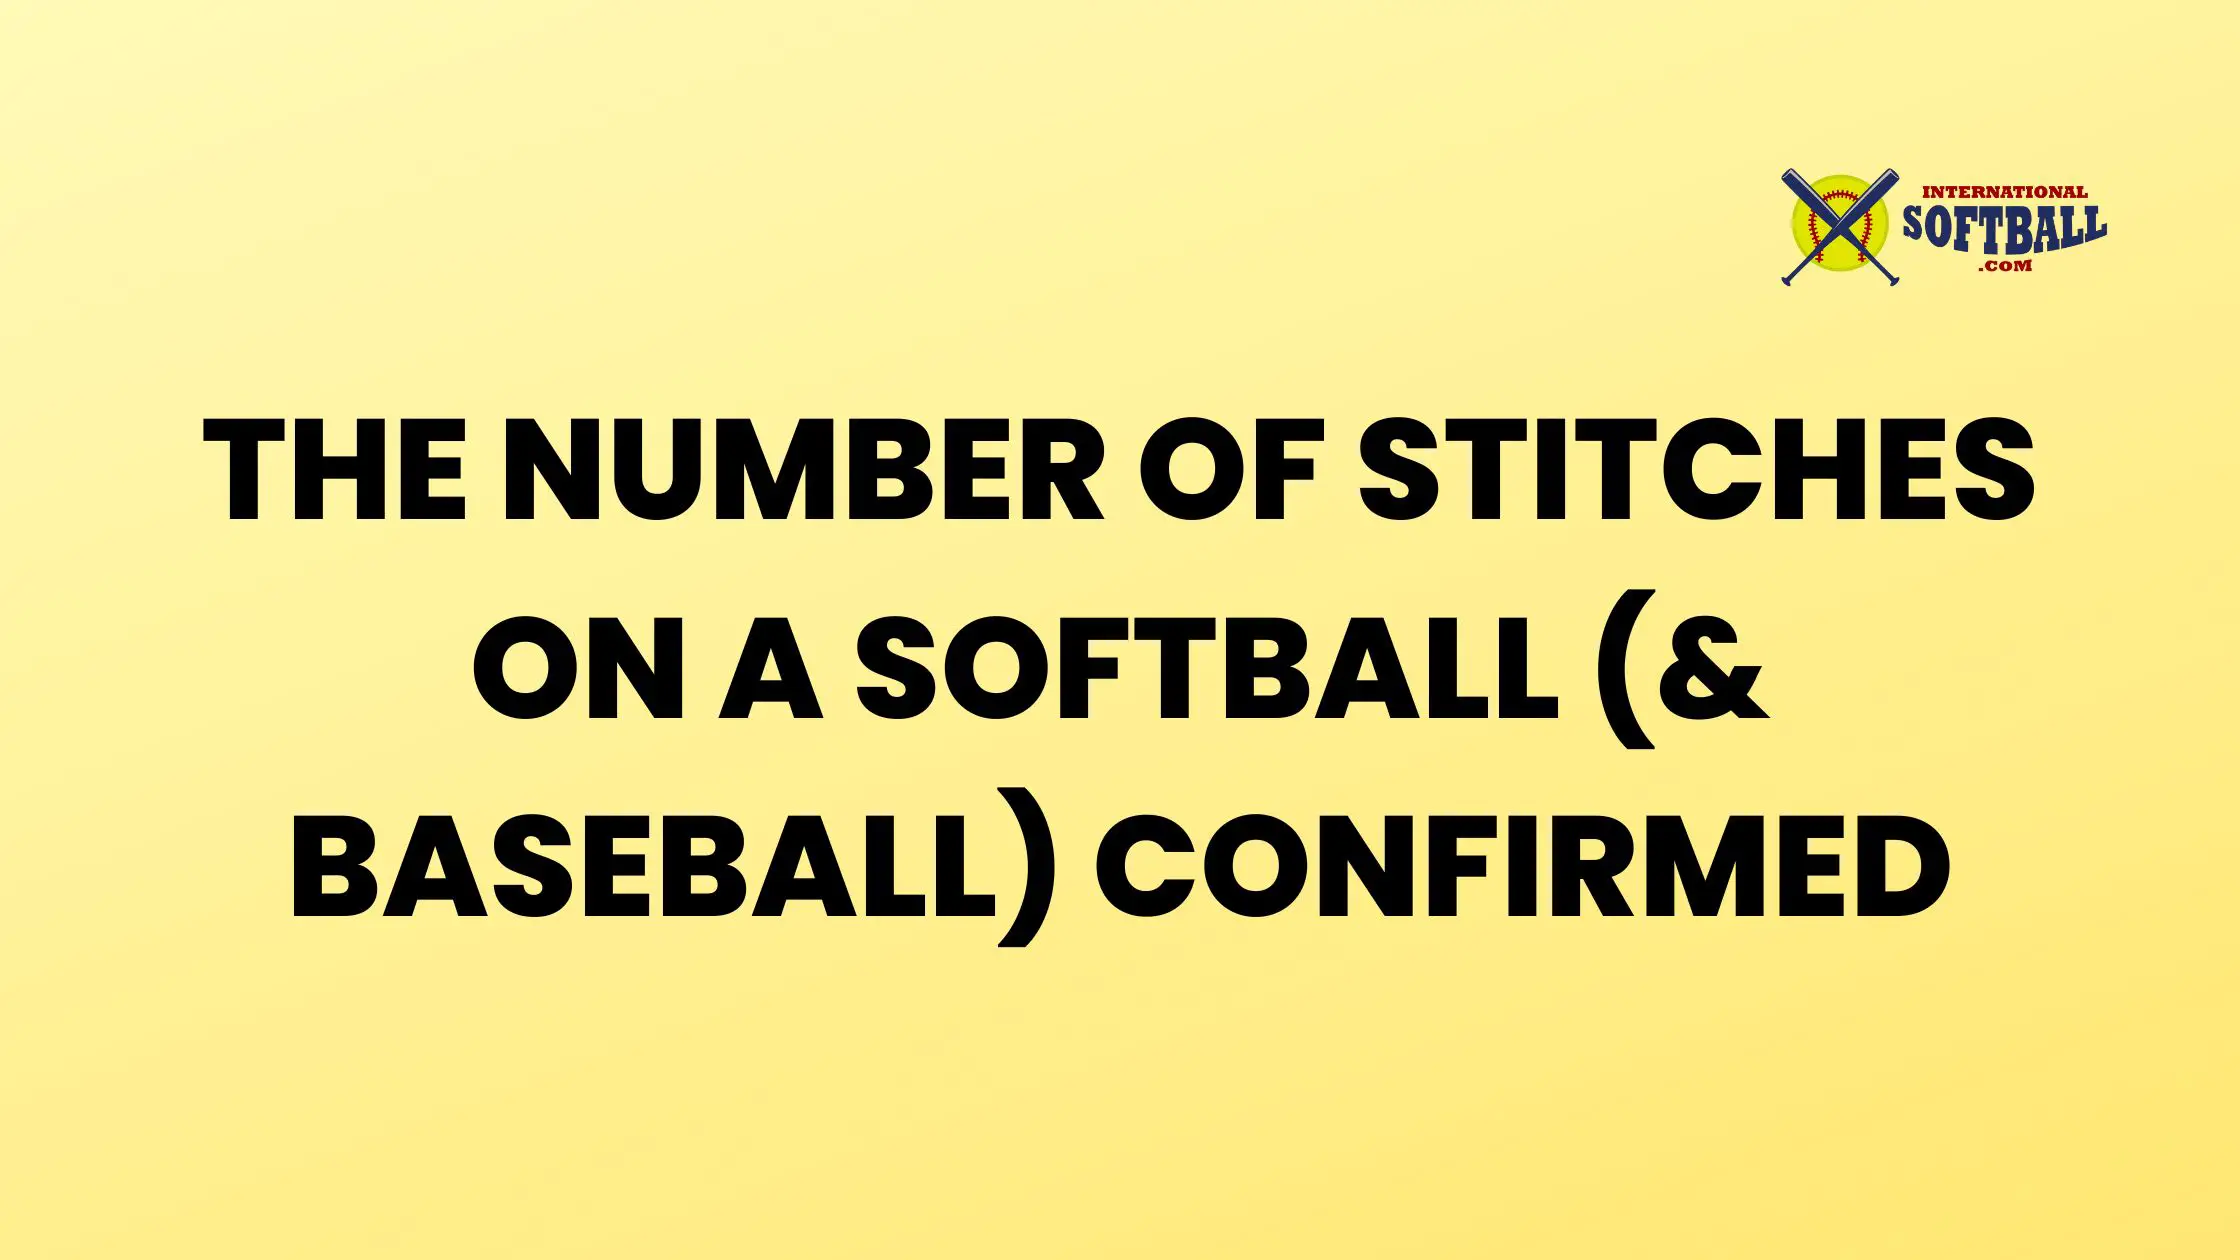 THE NUMBER OF STITCHES ON A SOFTBALL (& BASEBALL) CONFIRMED